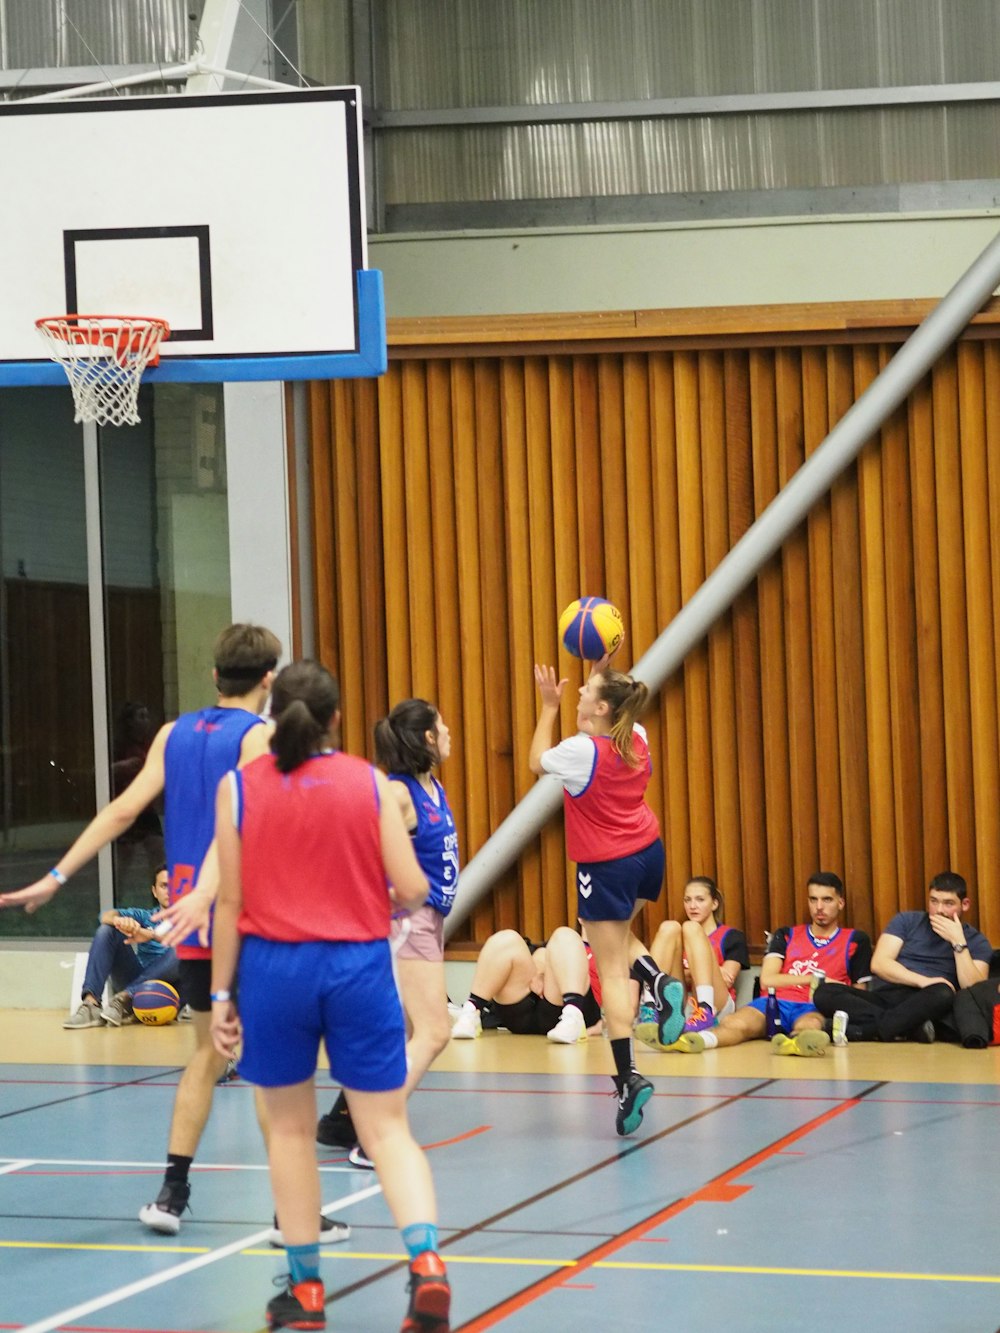 a group of young people playing a game of basketball